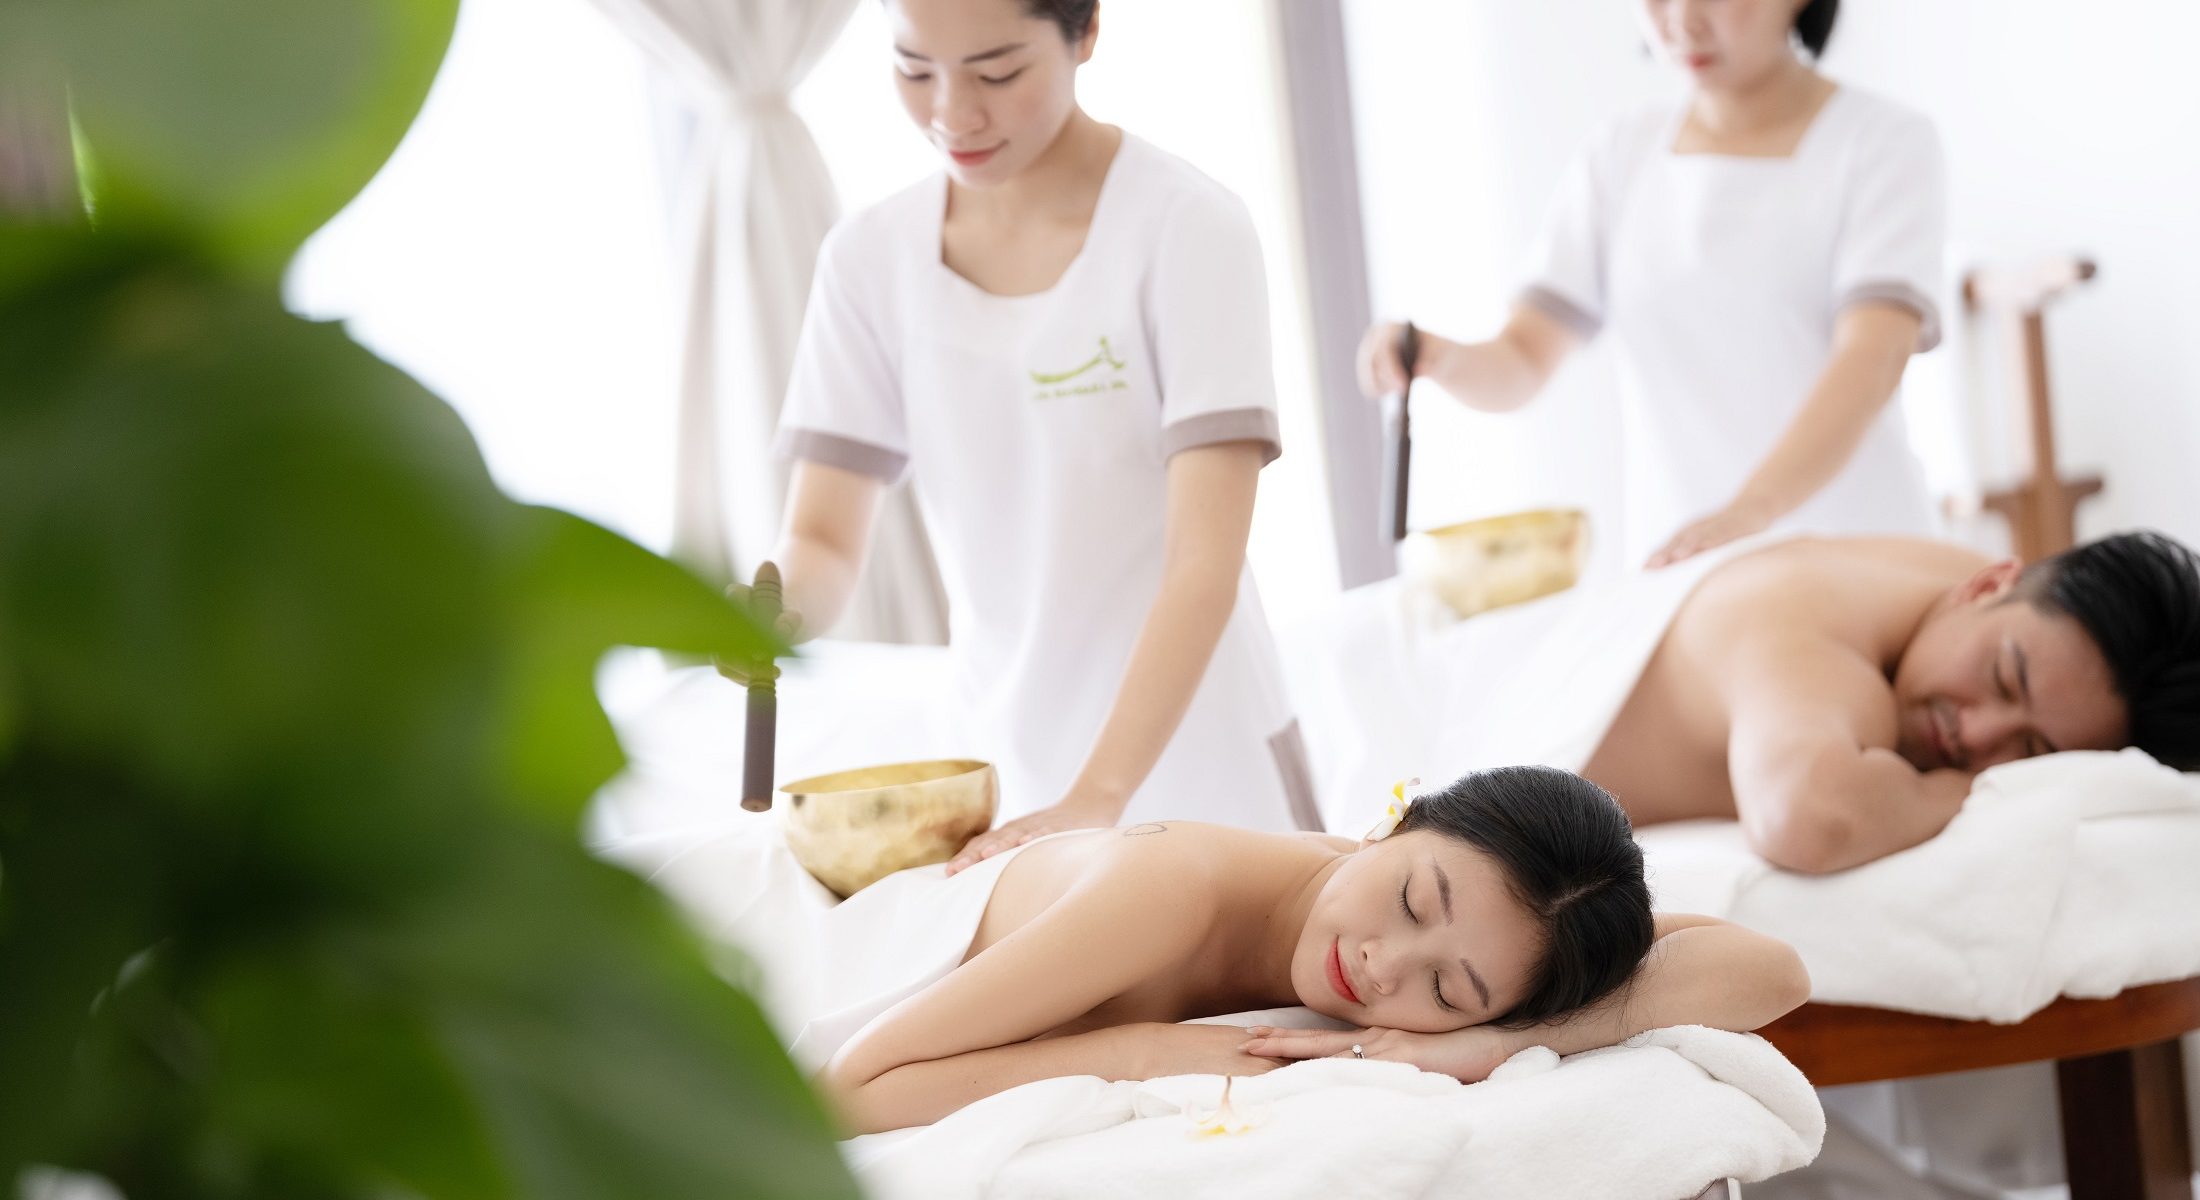 Double room spa service with two guests and two therapists